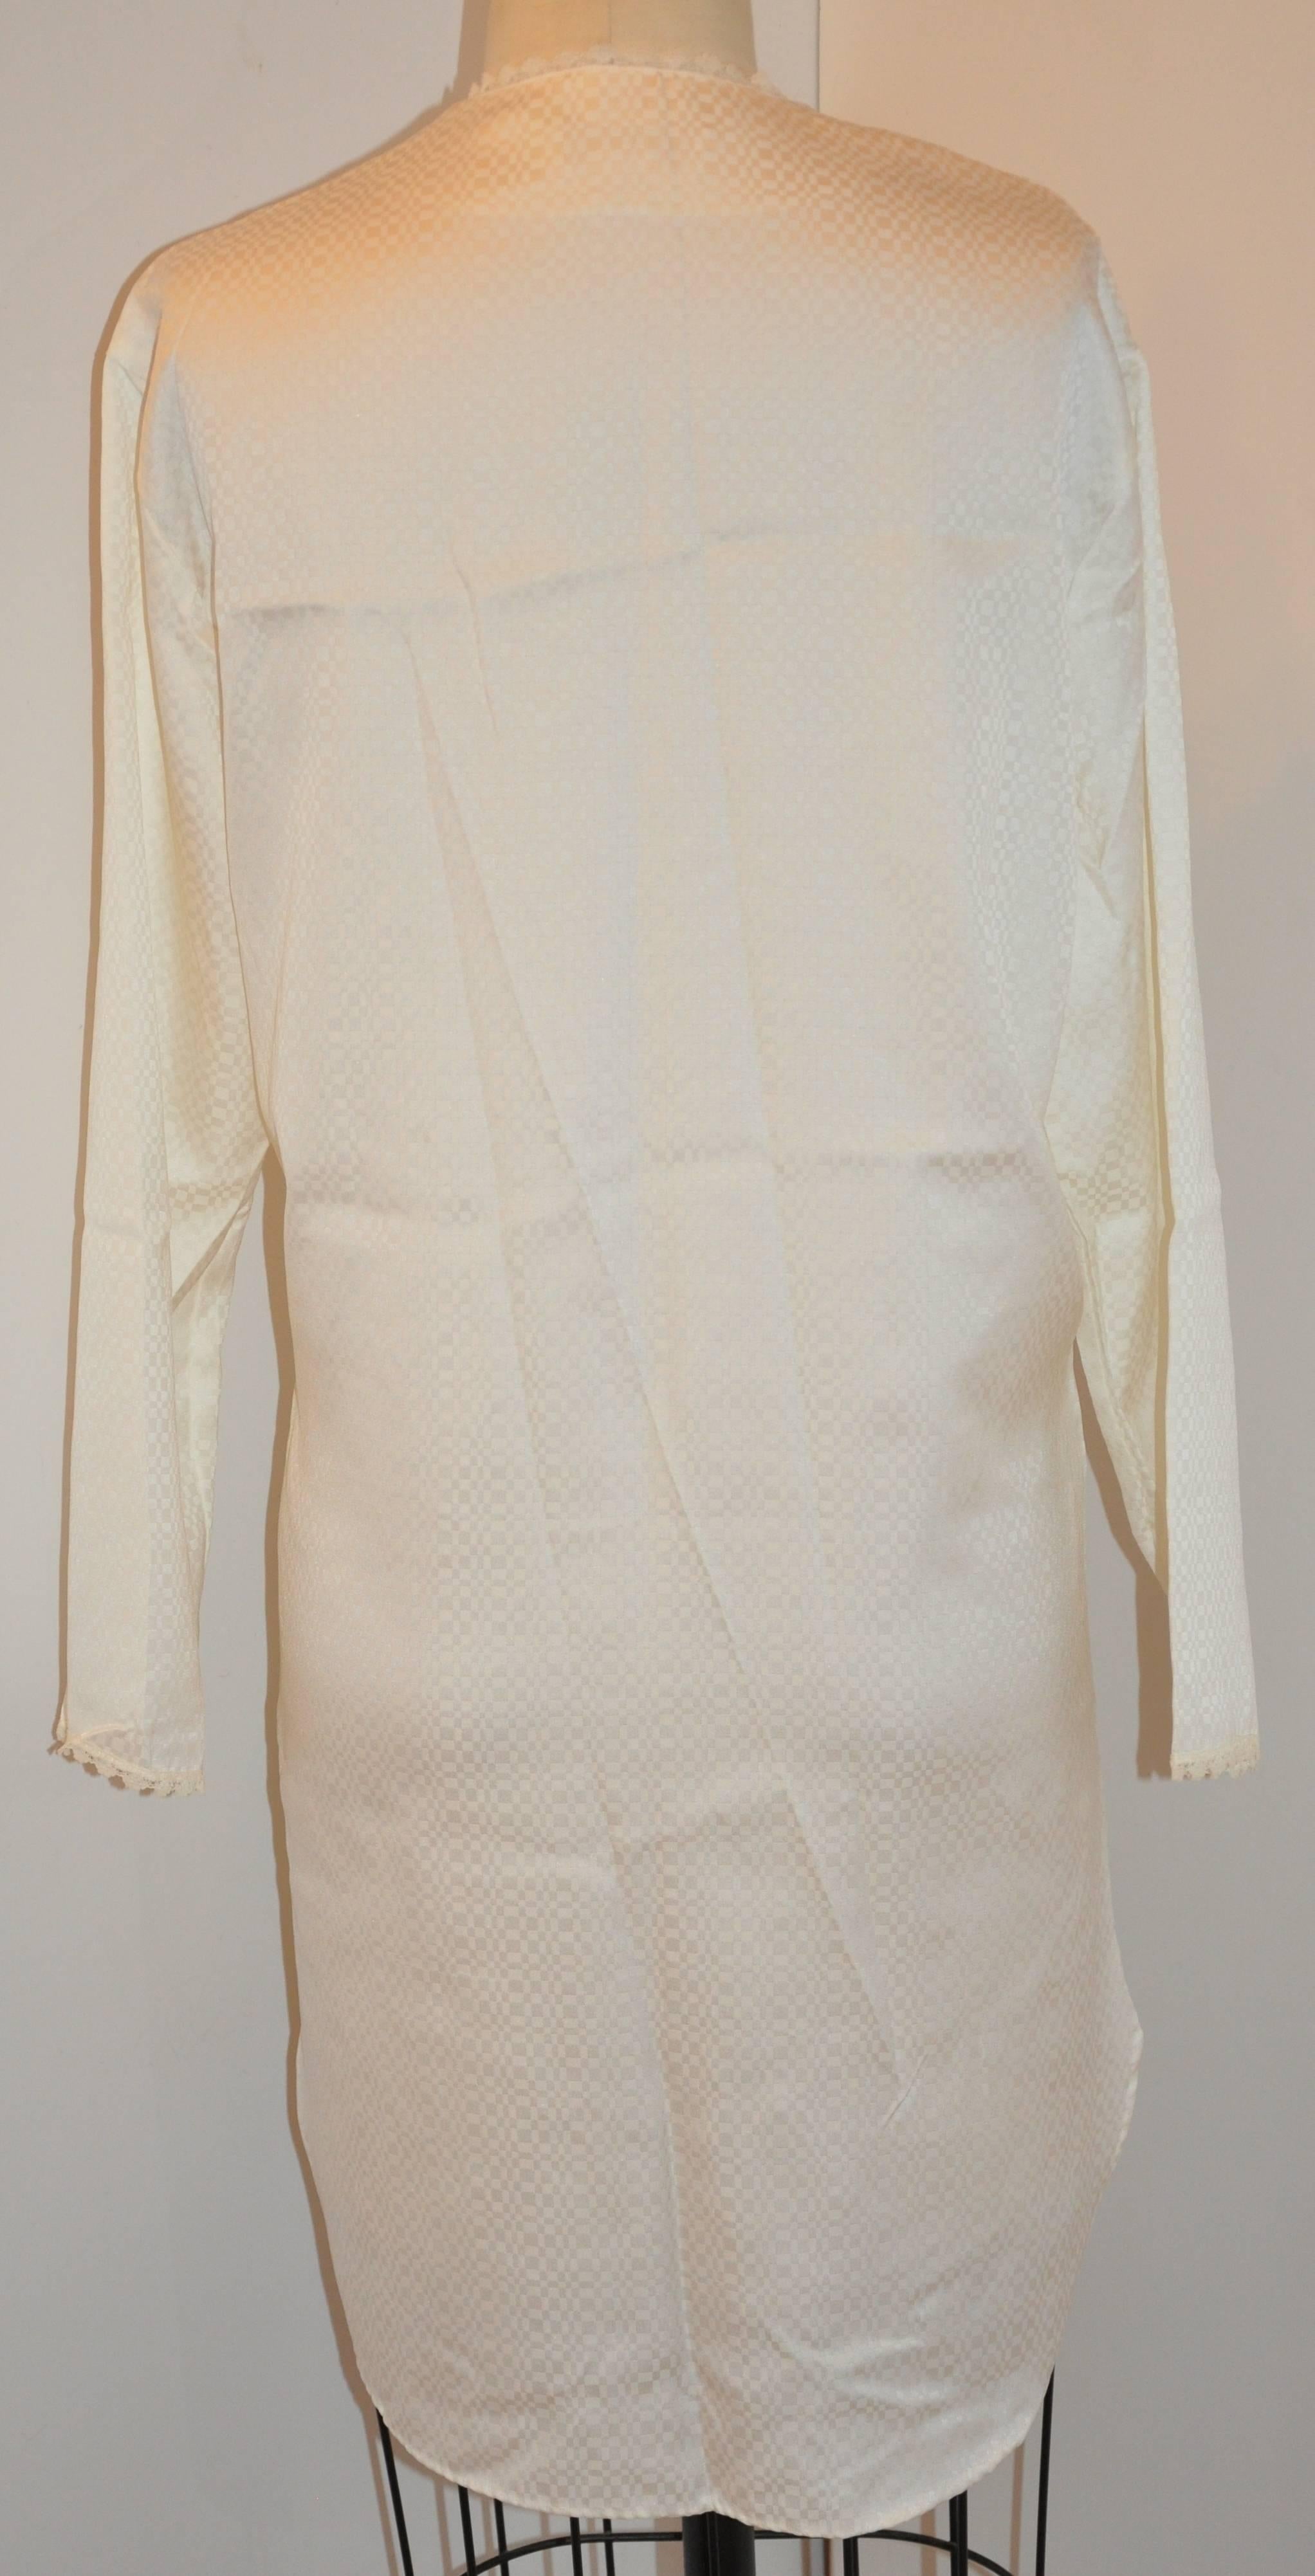      Christian Dior for Saks Fifth Avenue wonderful ivory & lace detailing button front night-shirt is accented with lace edges as well as the front patch pocket with lace over lace. The scallop hemline has side slits and finished with